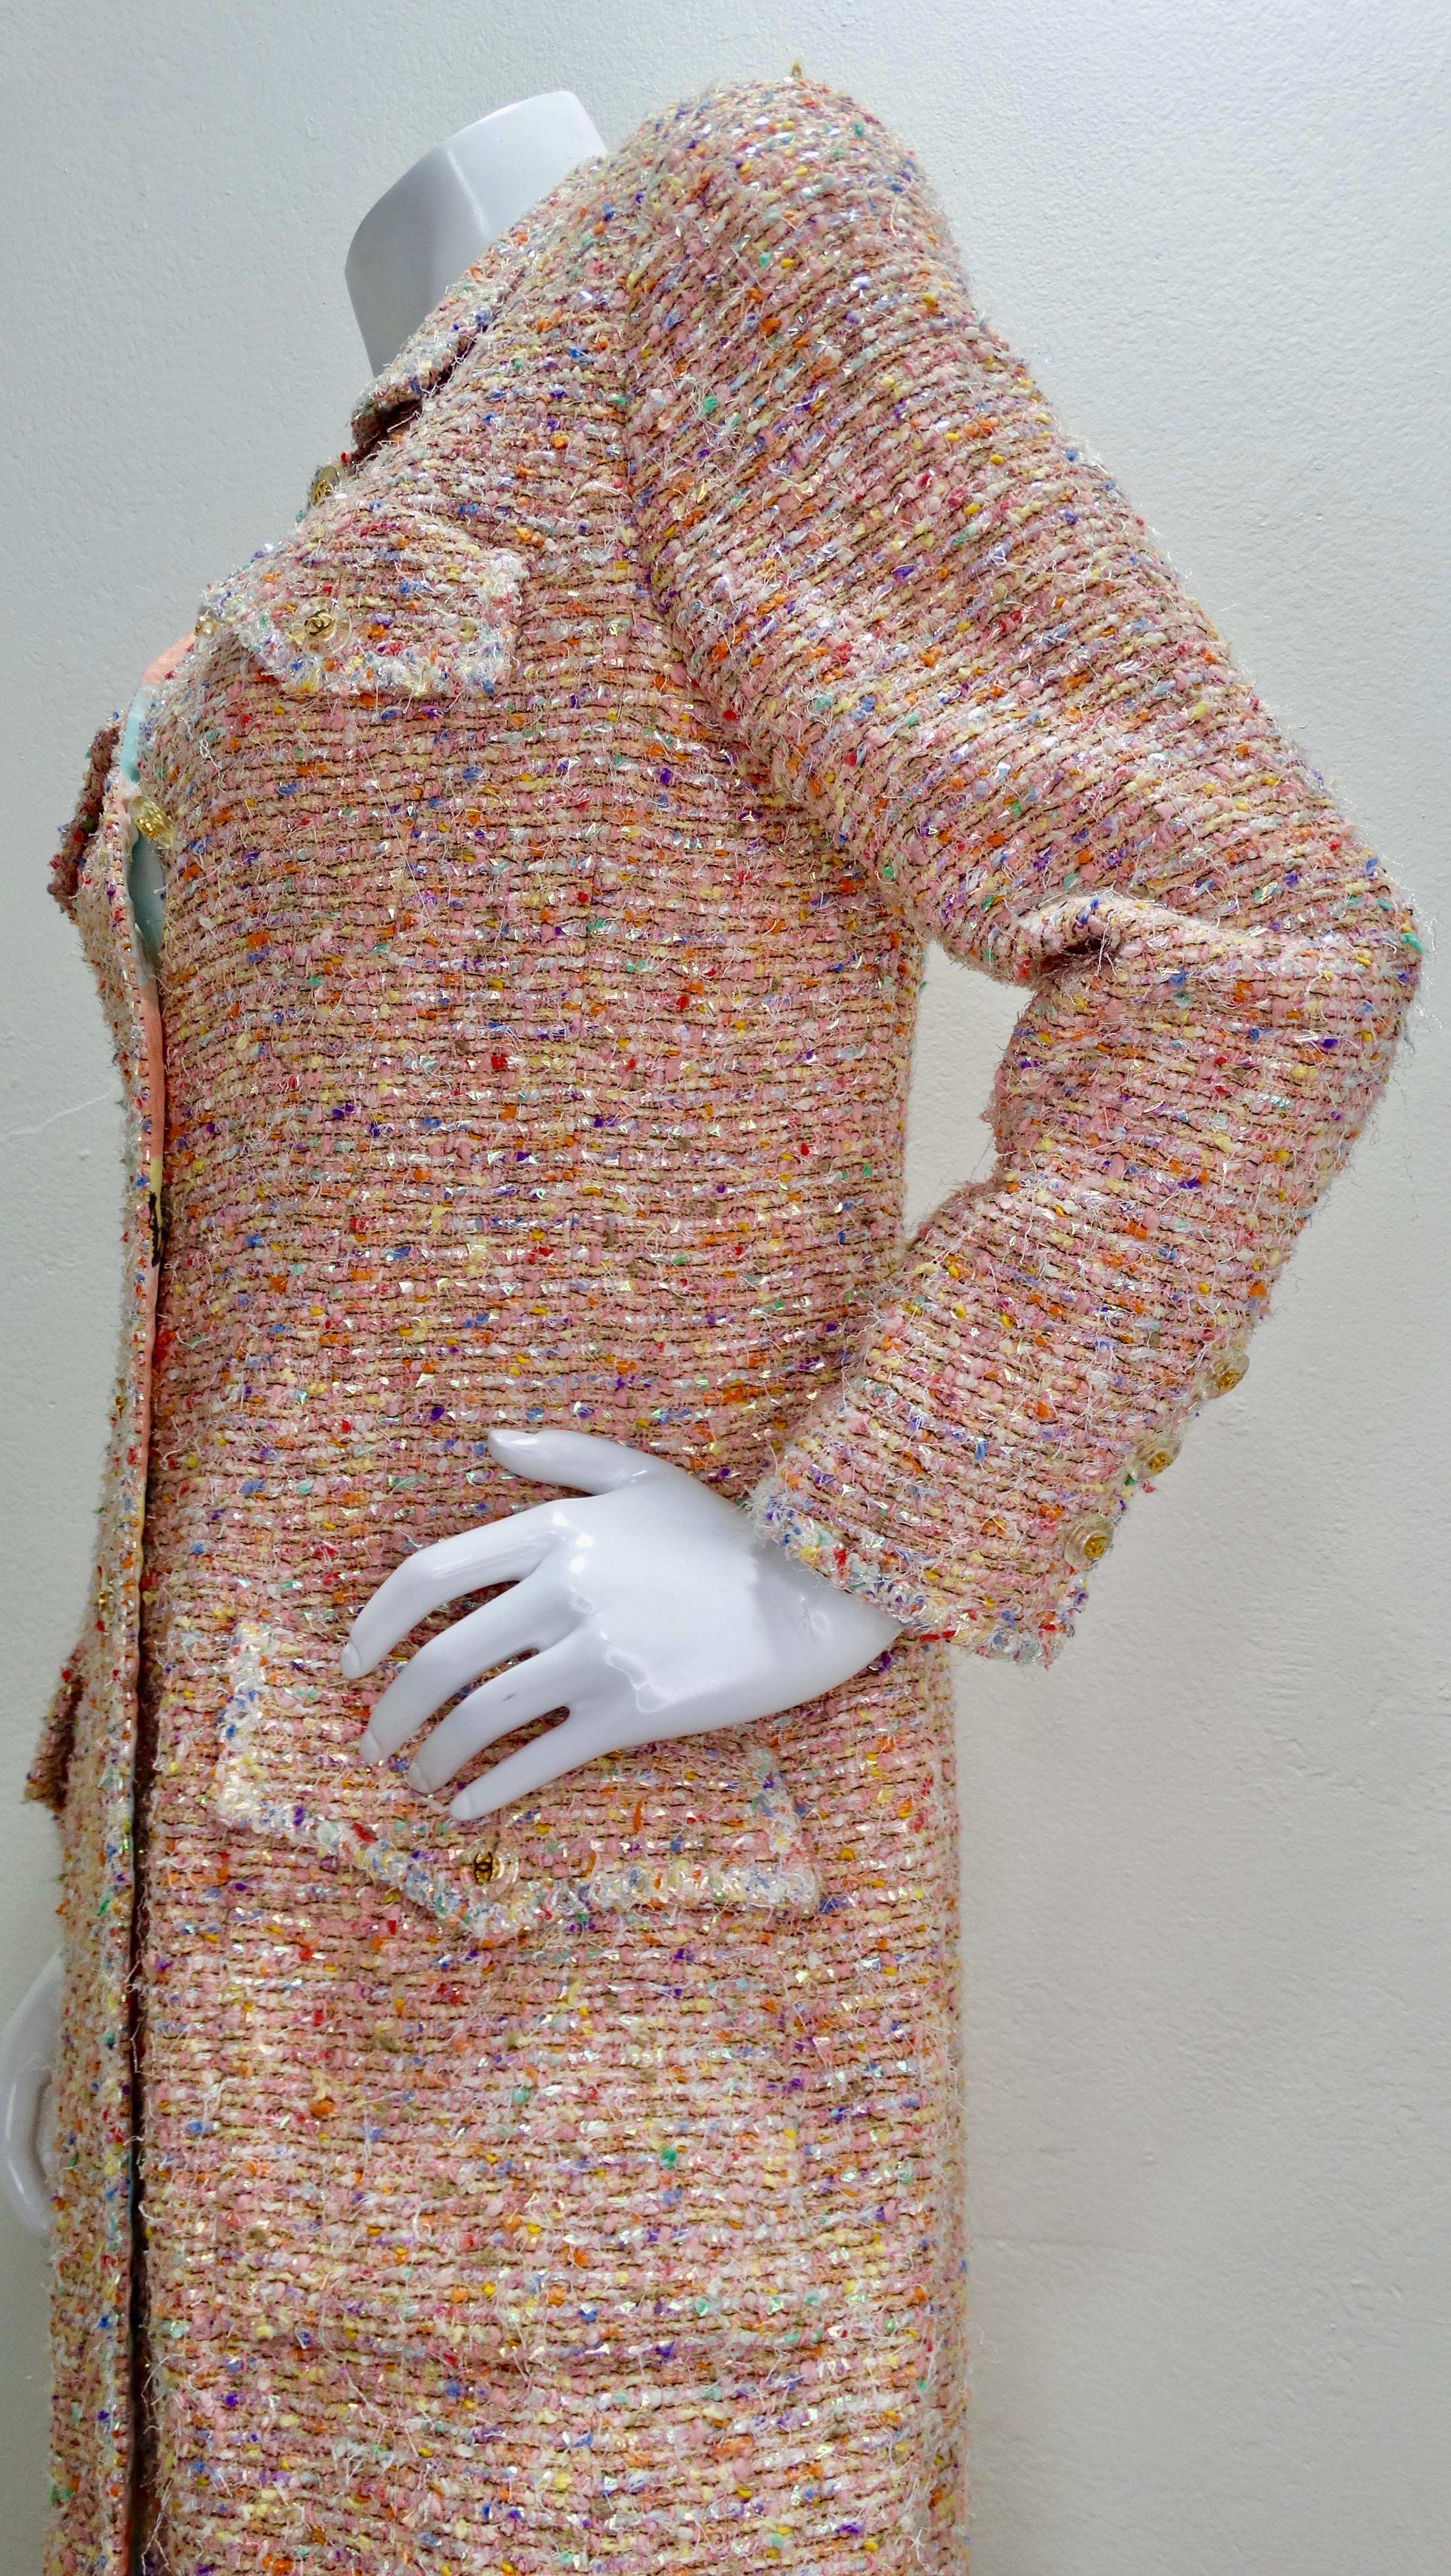 Calling all the ultimate Chanel lovers! Circa 1997 from their Spring collection, this coat is crafted from pastel colored tweed with colors like orange, pink, purple and yellow. Features clear acrylic buttons adorned with a mini gold CC and four